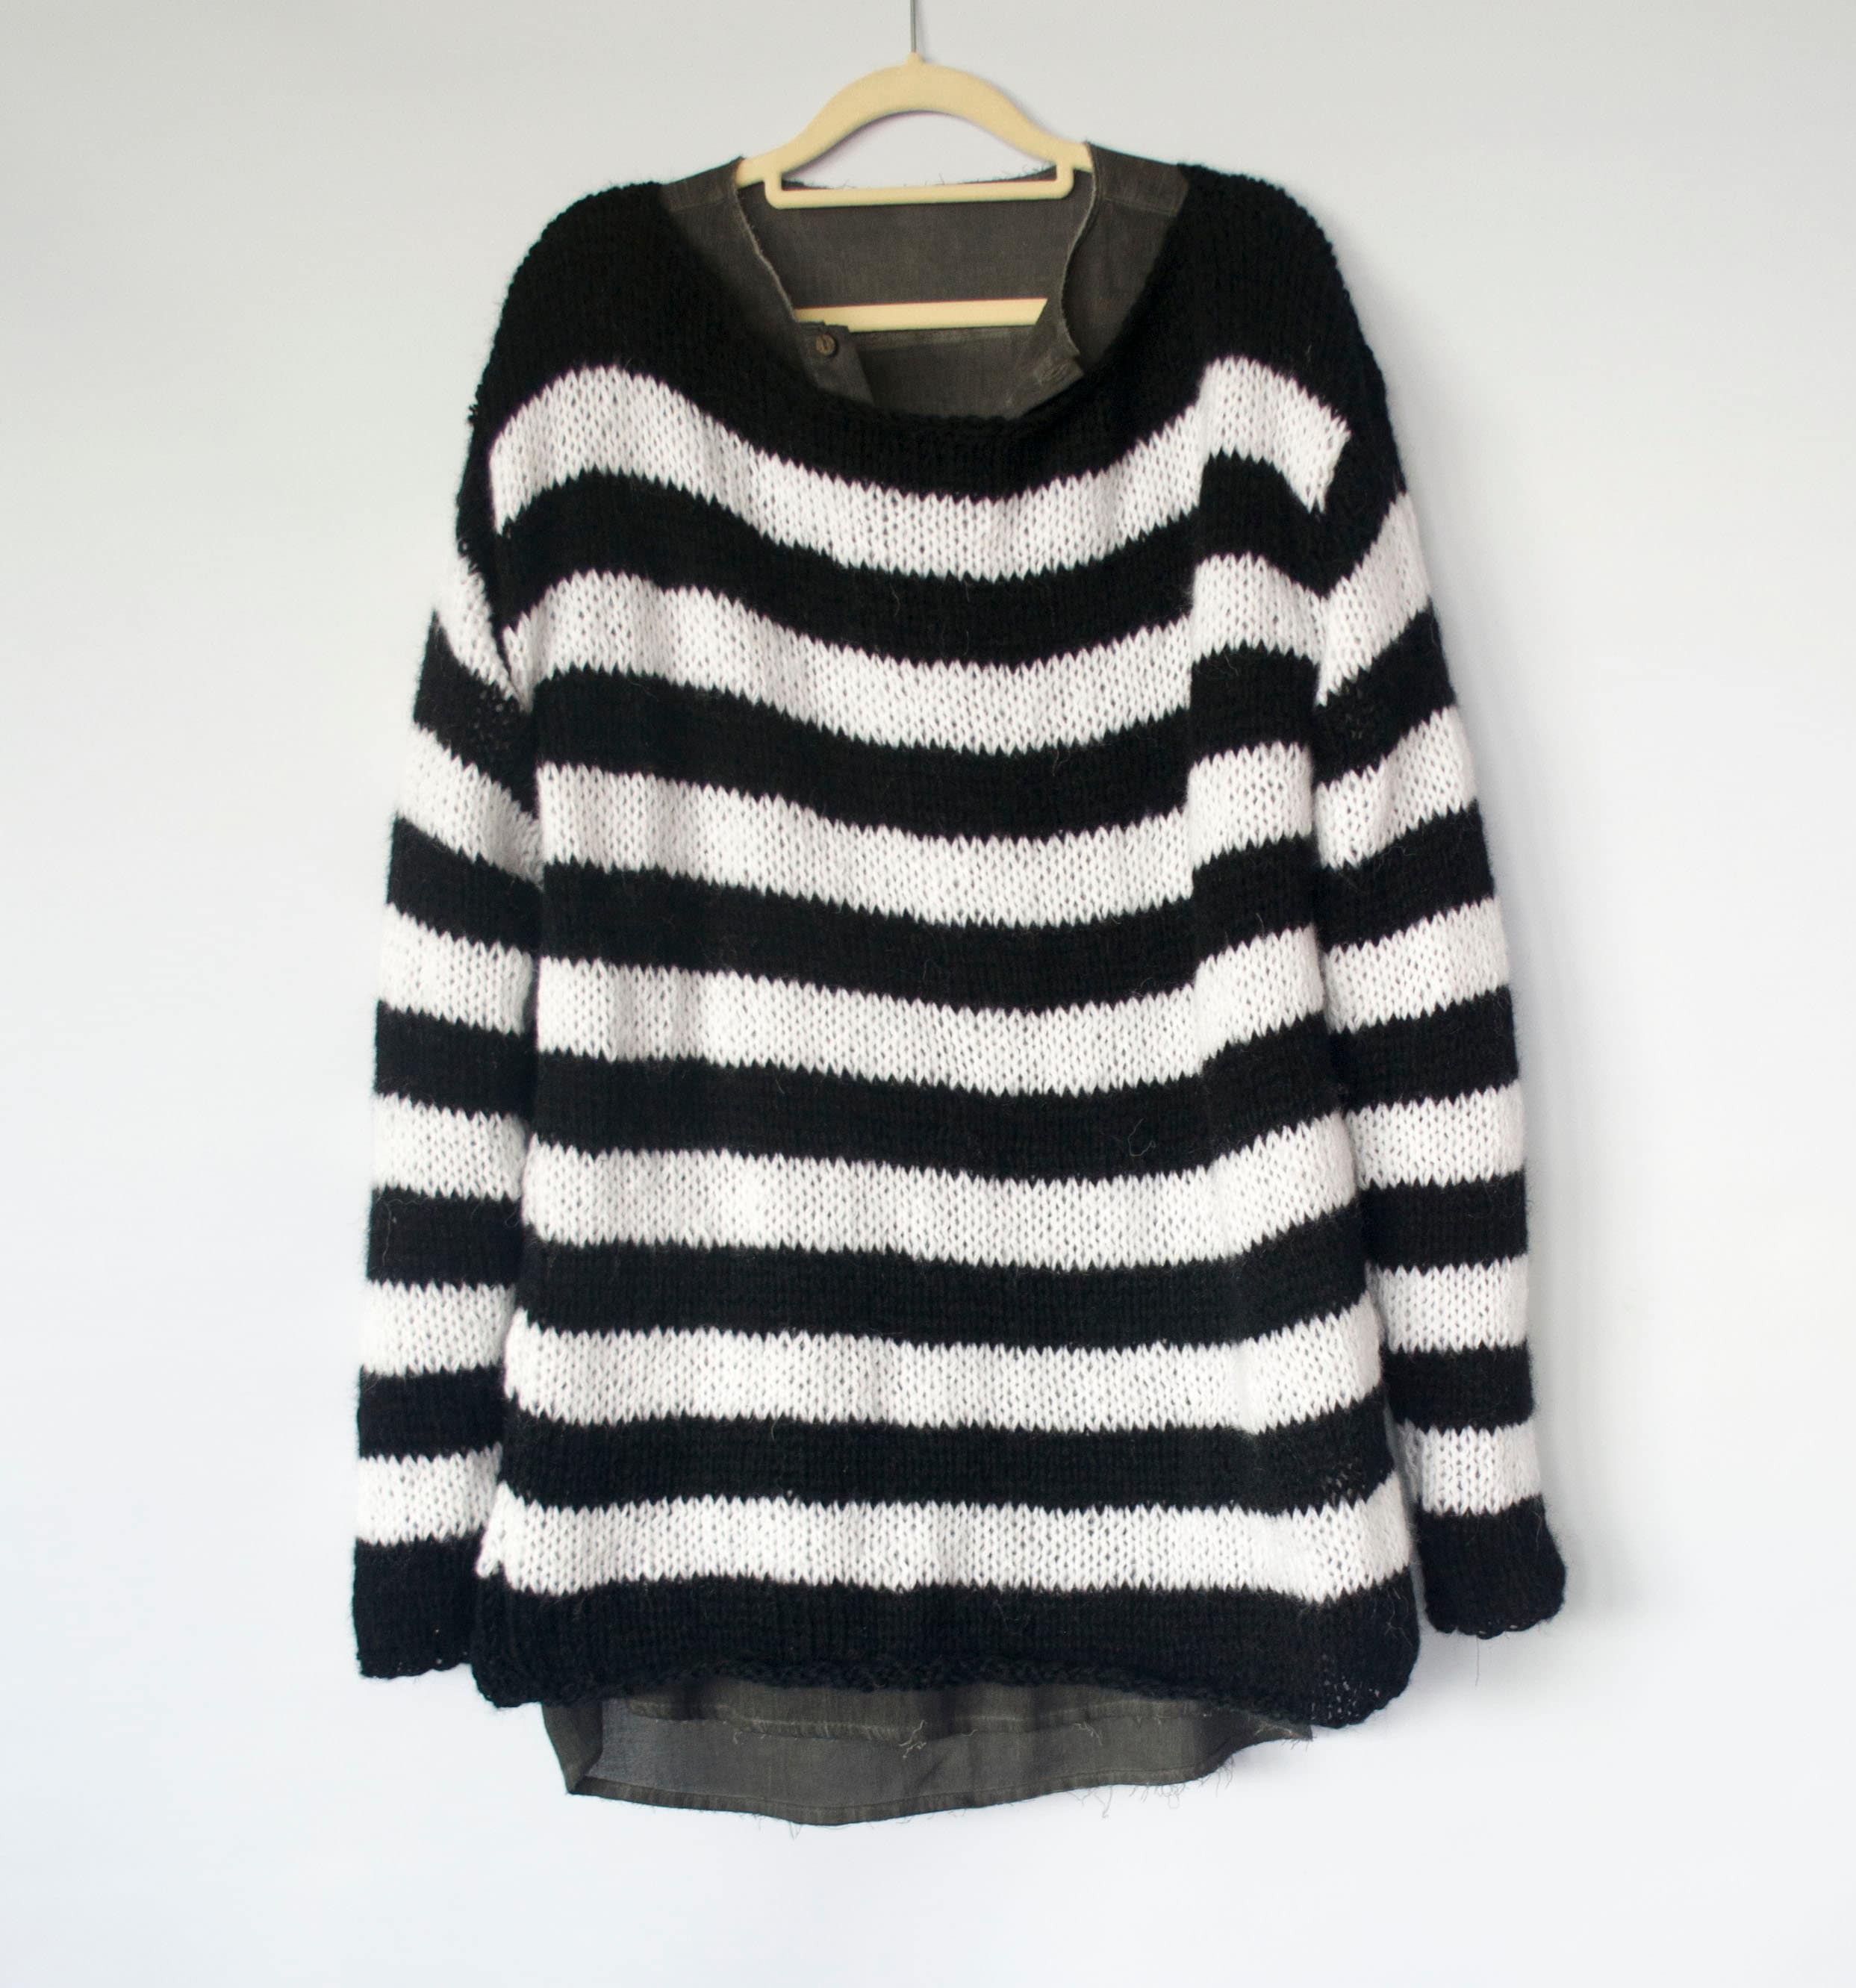 Black and White Striped Sweater, Baggy Mohair Jumper, Man Rave